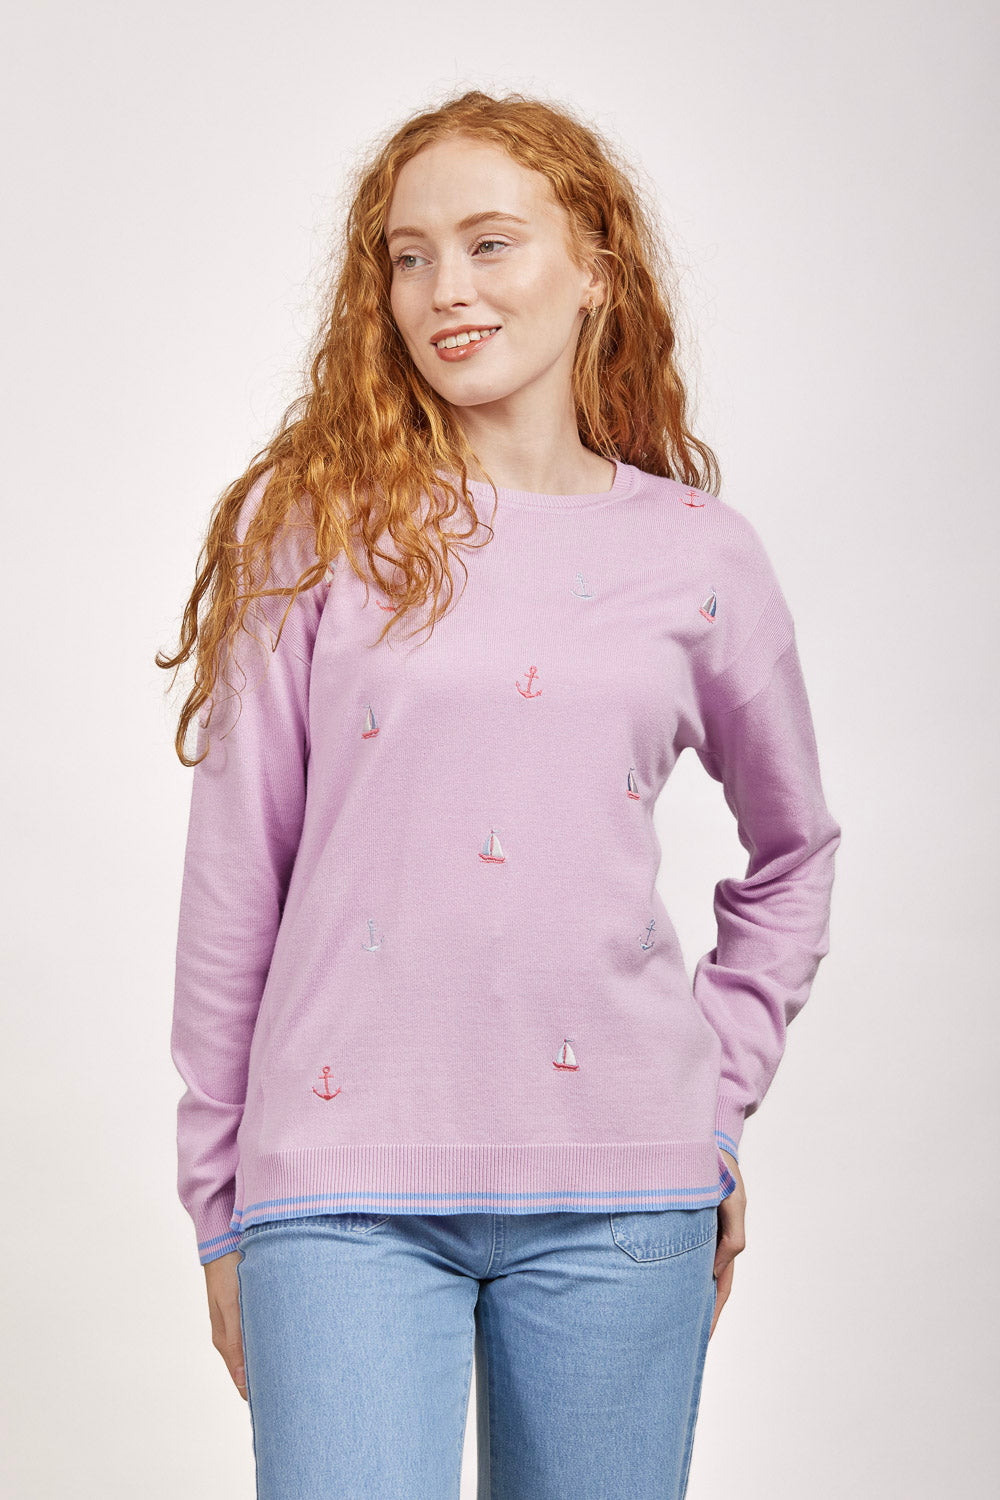 Boat and Anchor Jumper